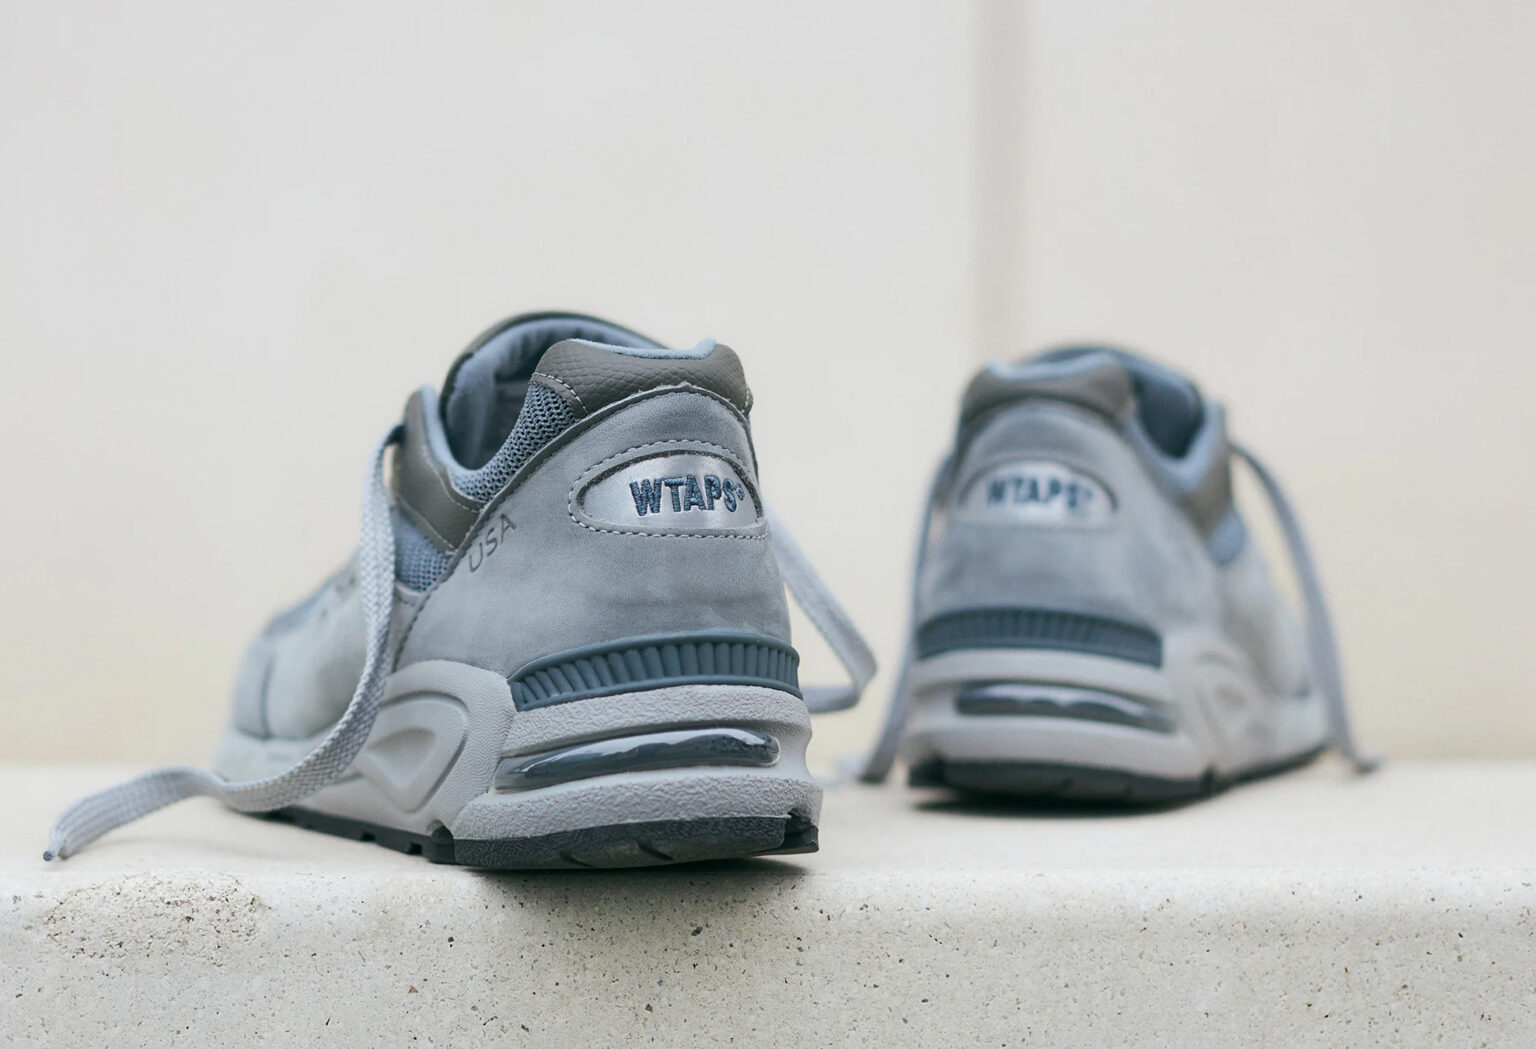 WTAPS x New Balance 990v2 | sneakerb0b RELEASES